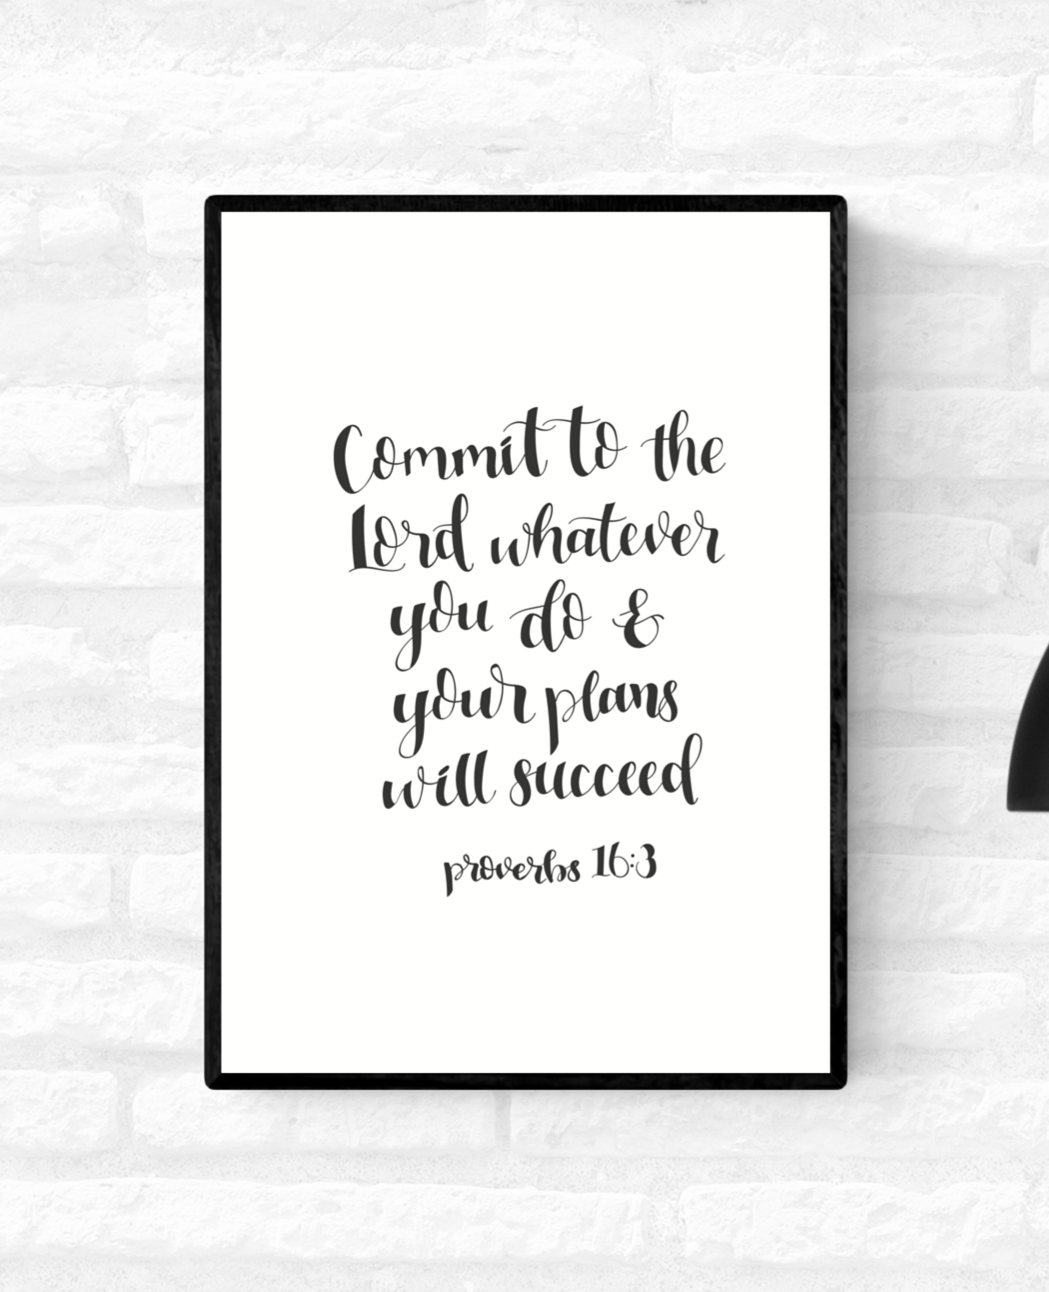 Framed wall quote scripture Proverbs 16:3 verse from the Holy Bible 